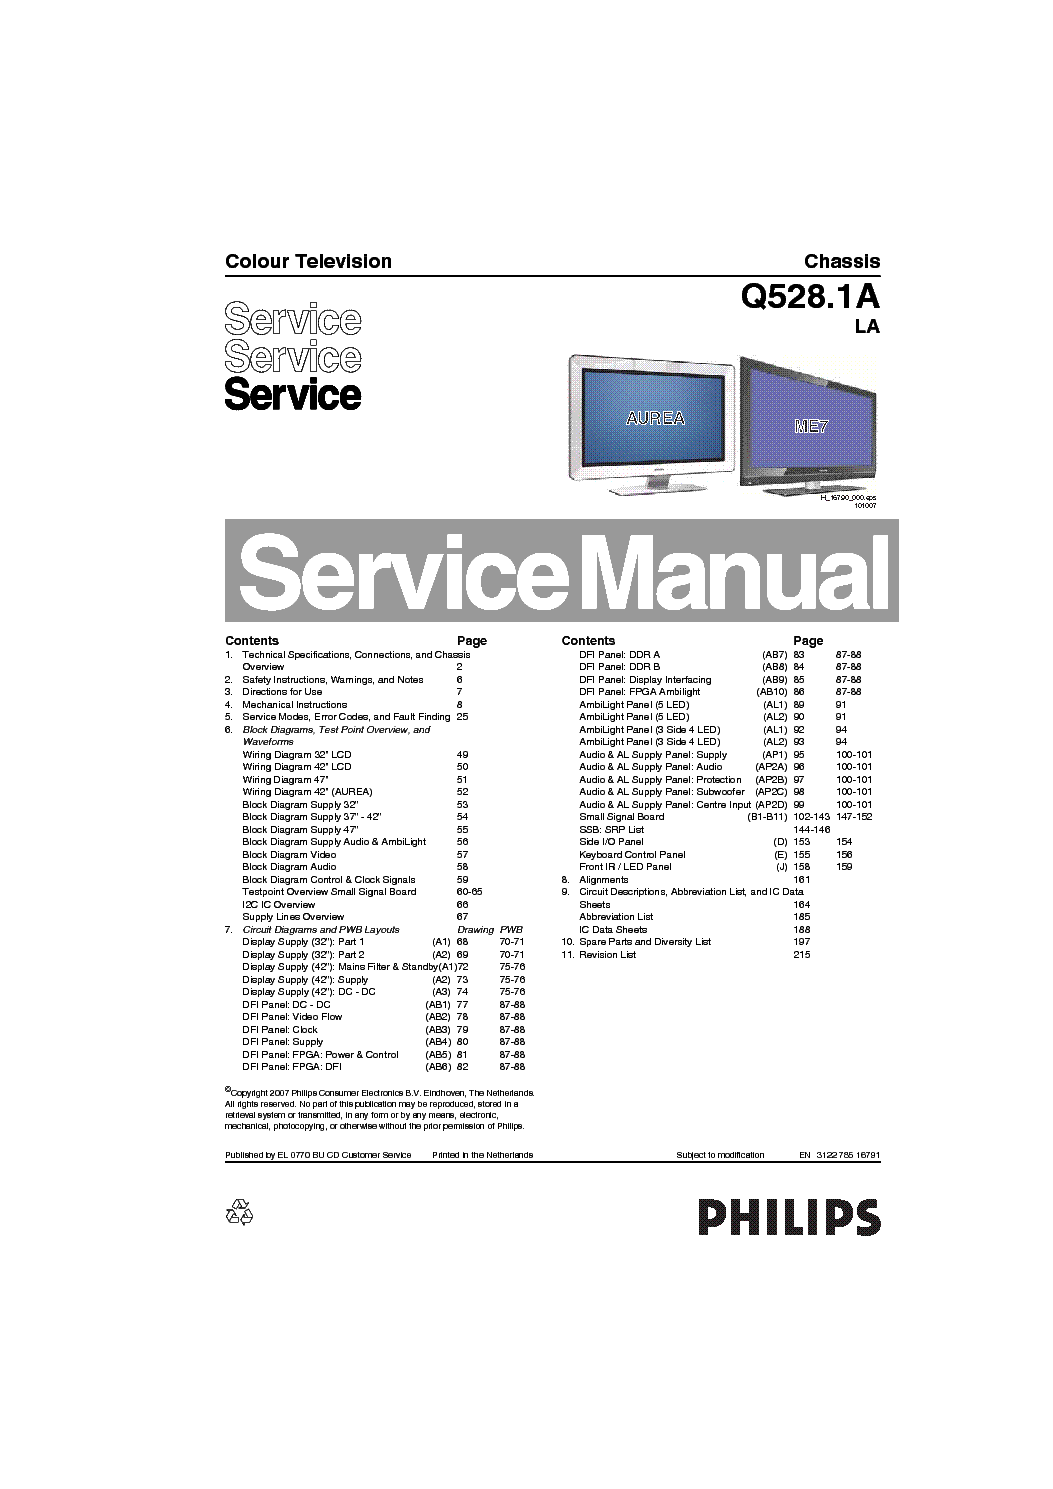 PHILIPS Q528.1ALA 312278516791 service manual (1st page)